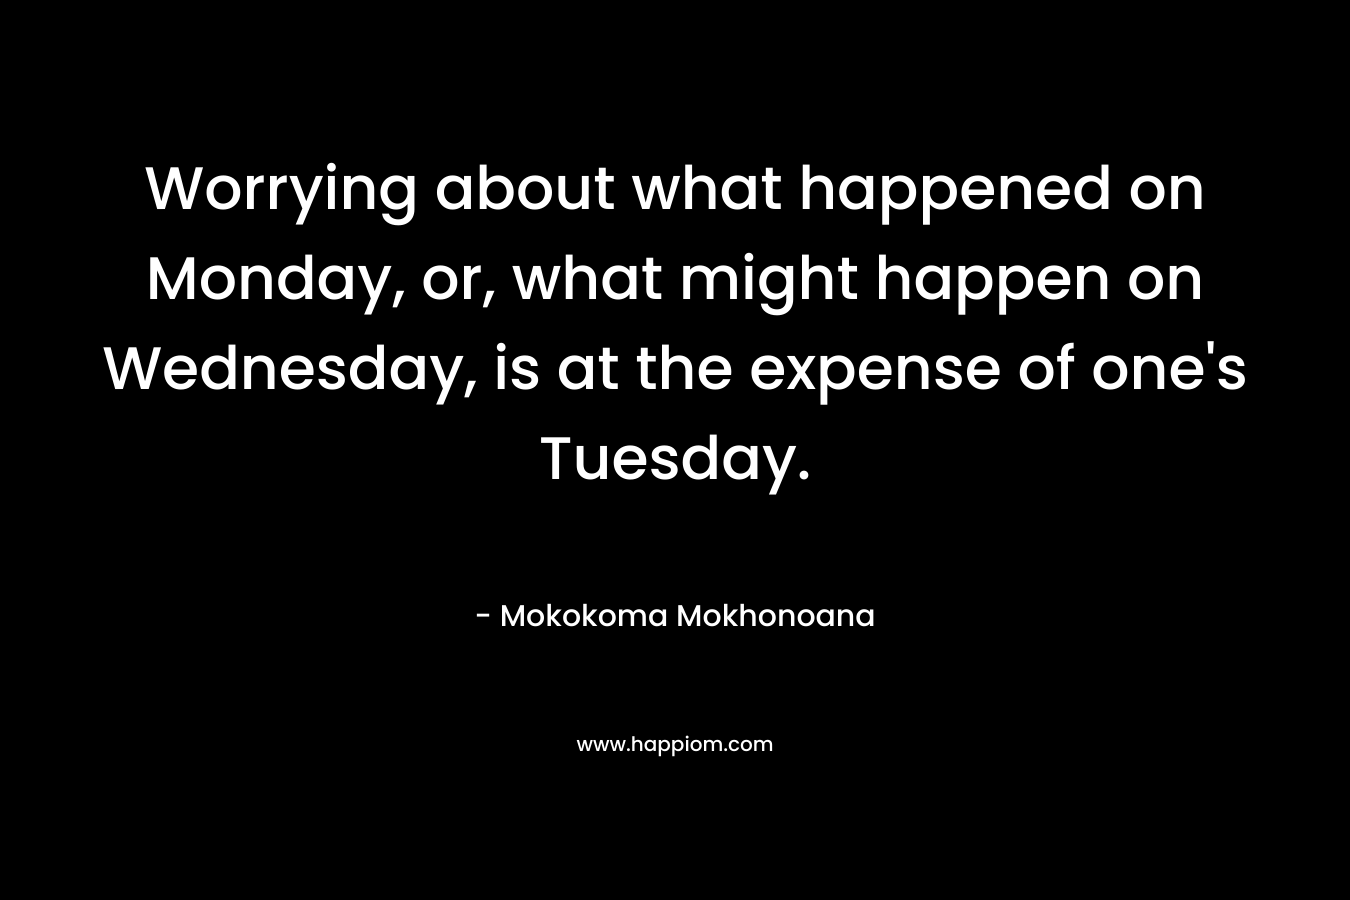 Worrying about what happened on Monday, or, what might happen on Wednesday, is at the expense of one’s Tuesday. – Mokokoma Mokhonoana